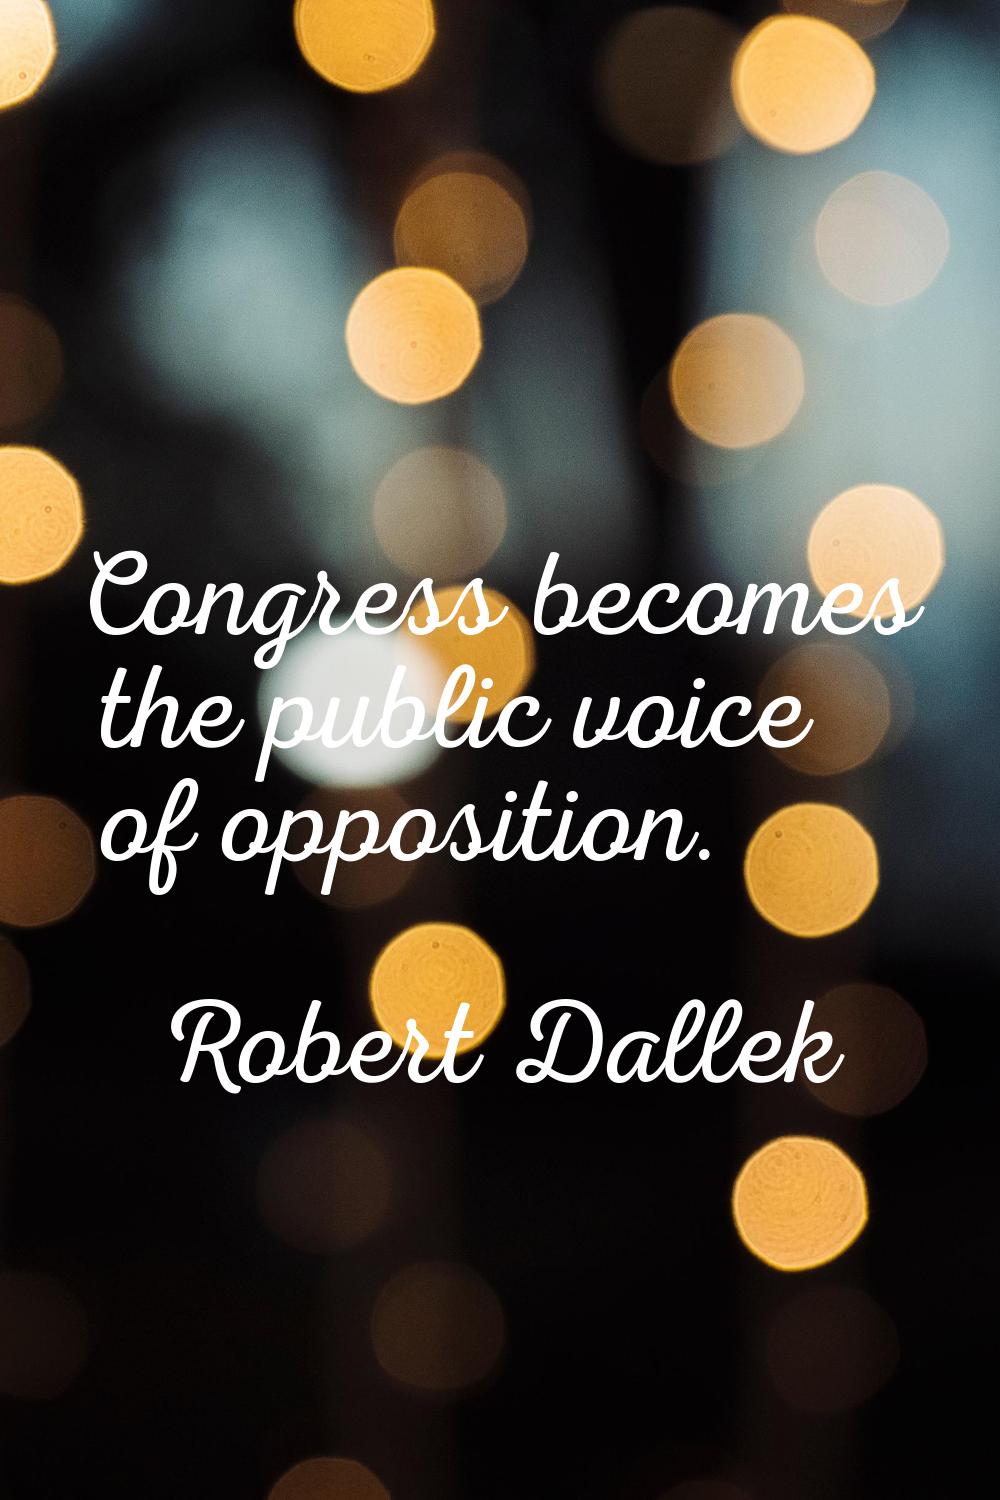 Congress becomes the public voice of opposition.